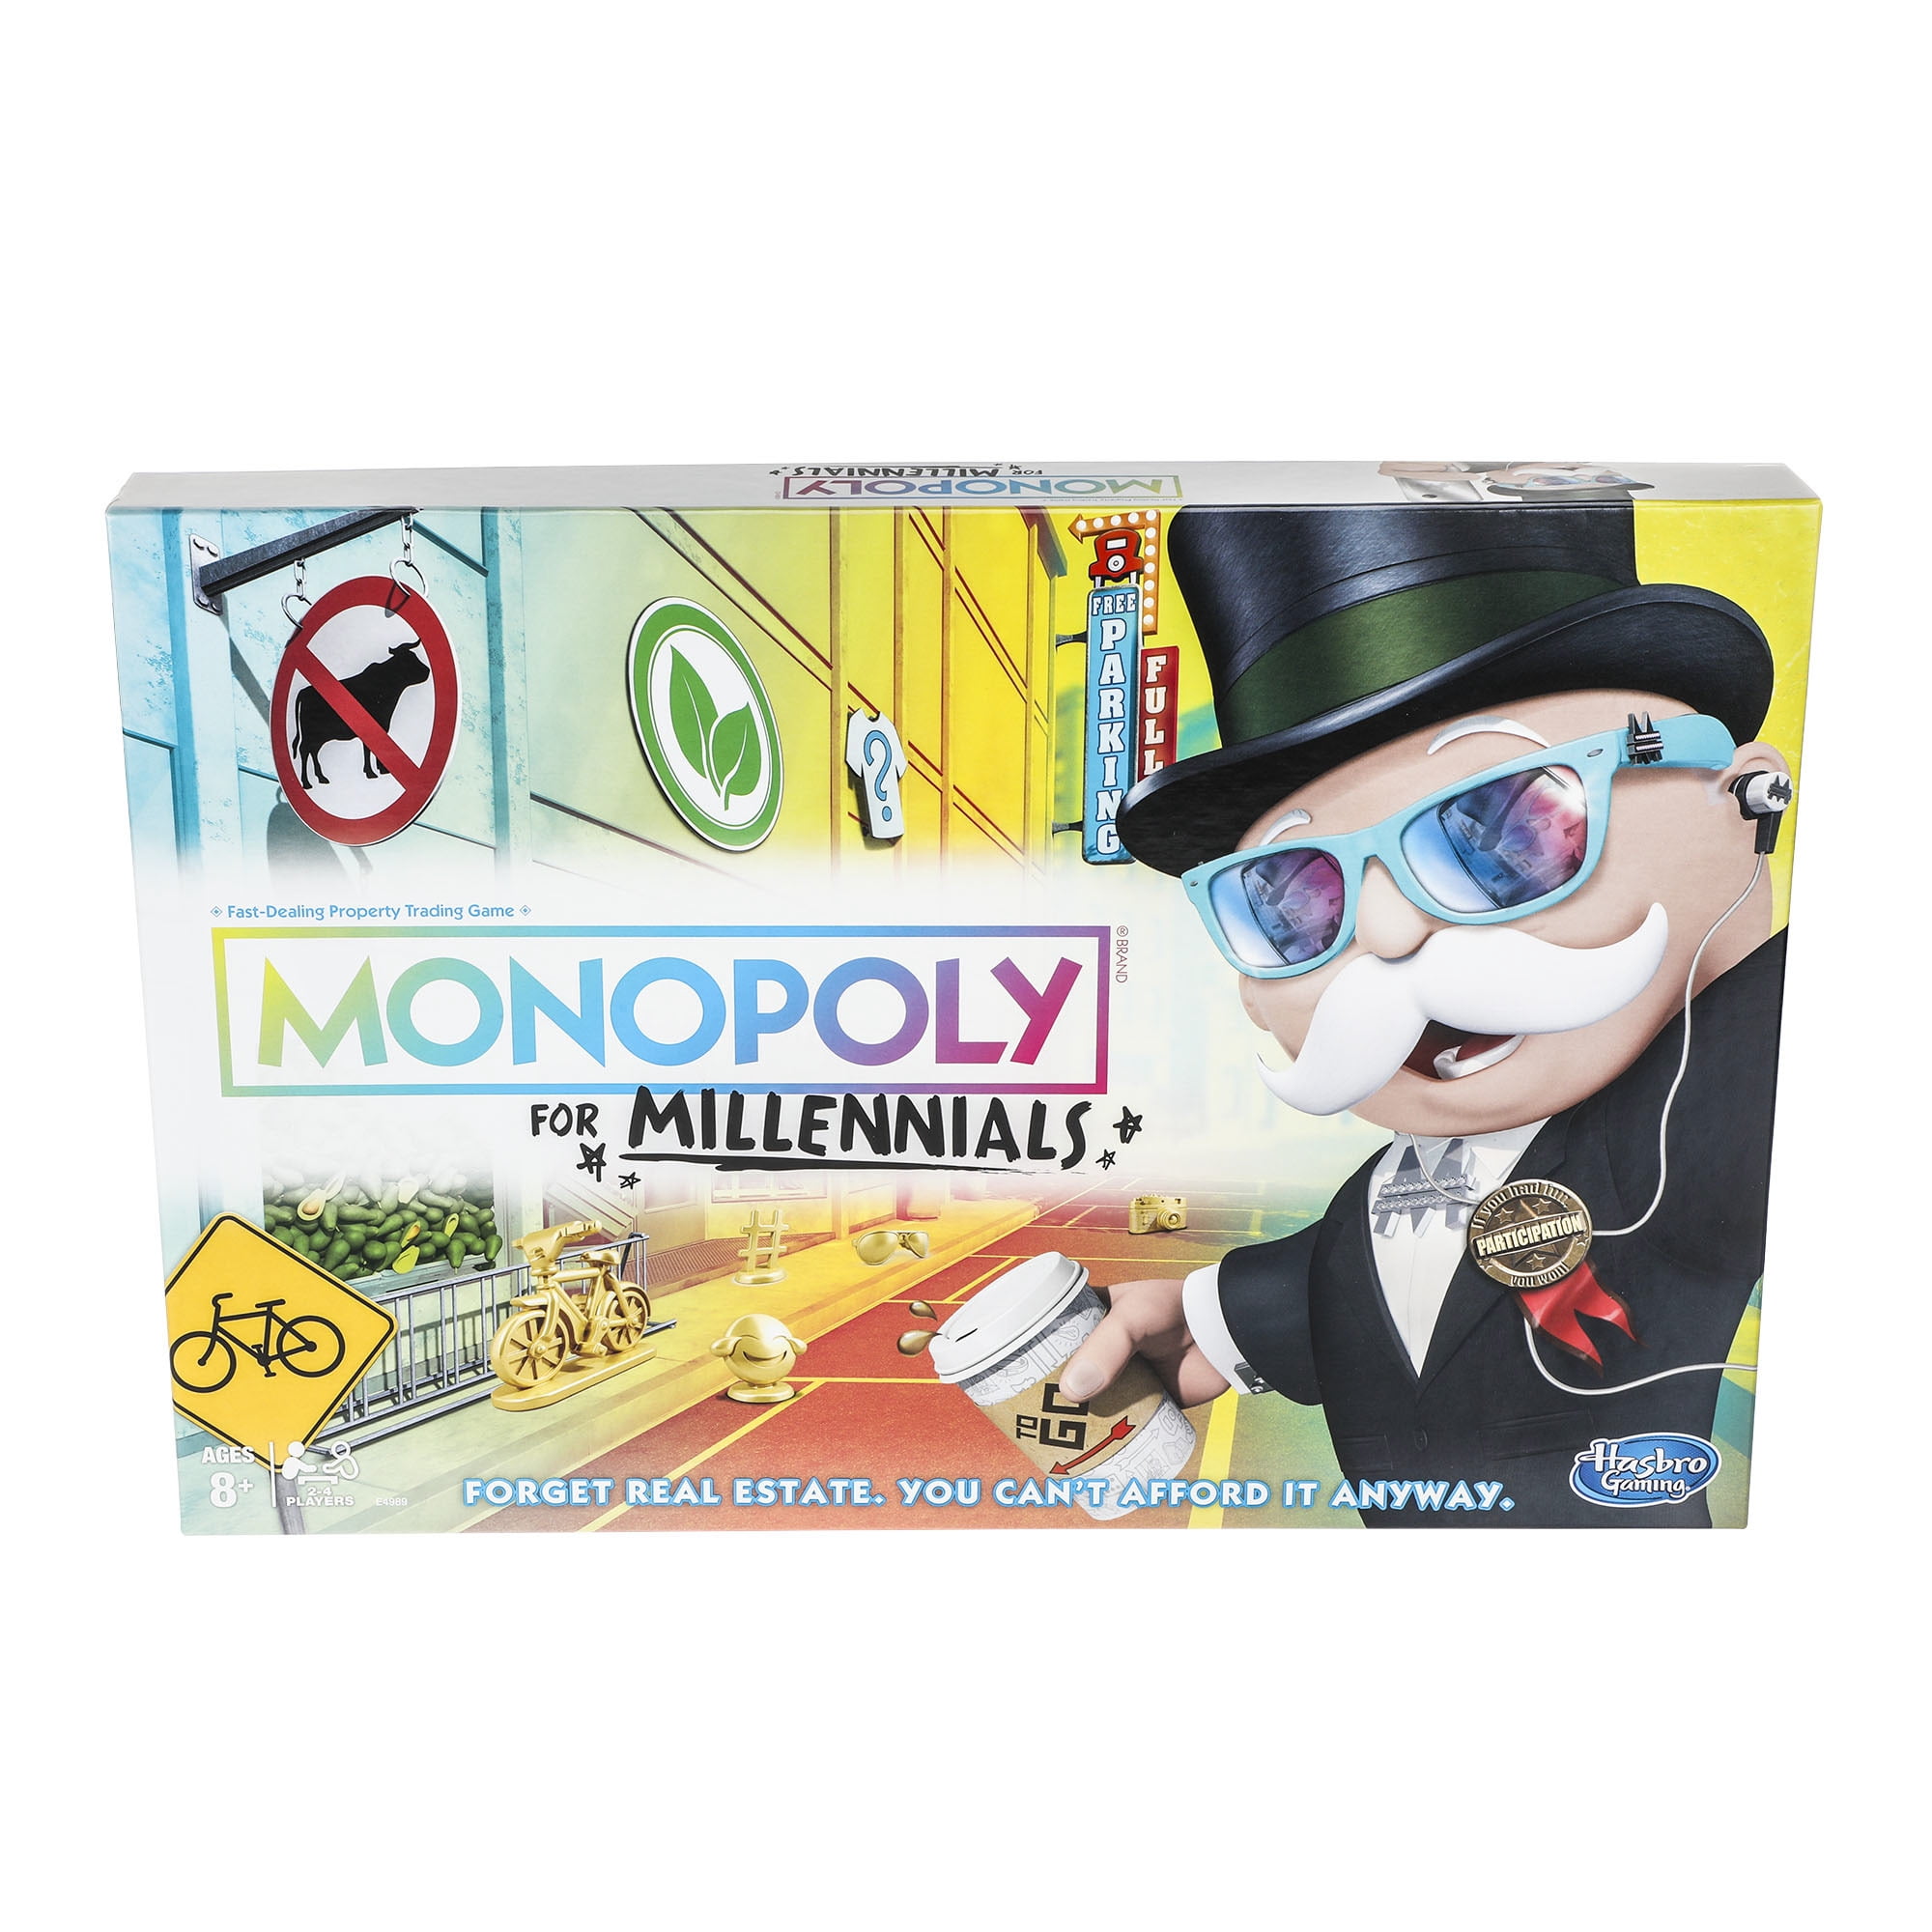 Hasbro Monopoly Blue Surprise Community Chest Walmart Opened Green for sale online 